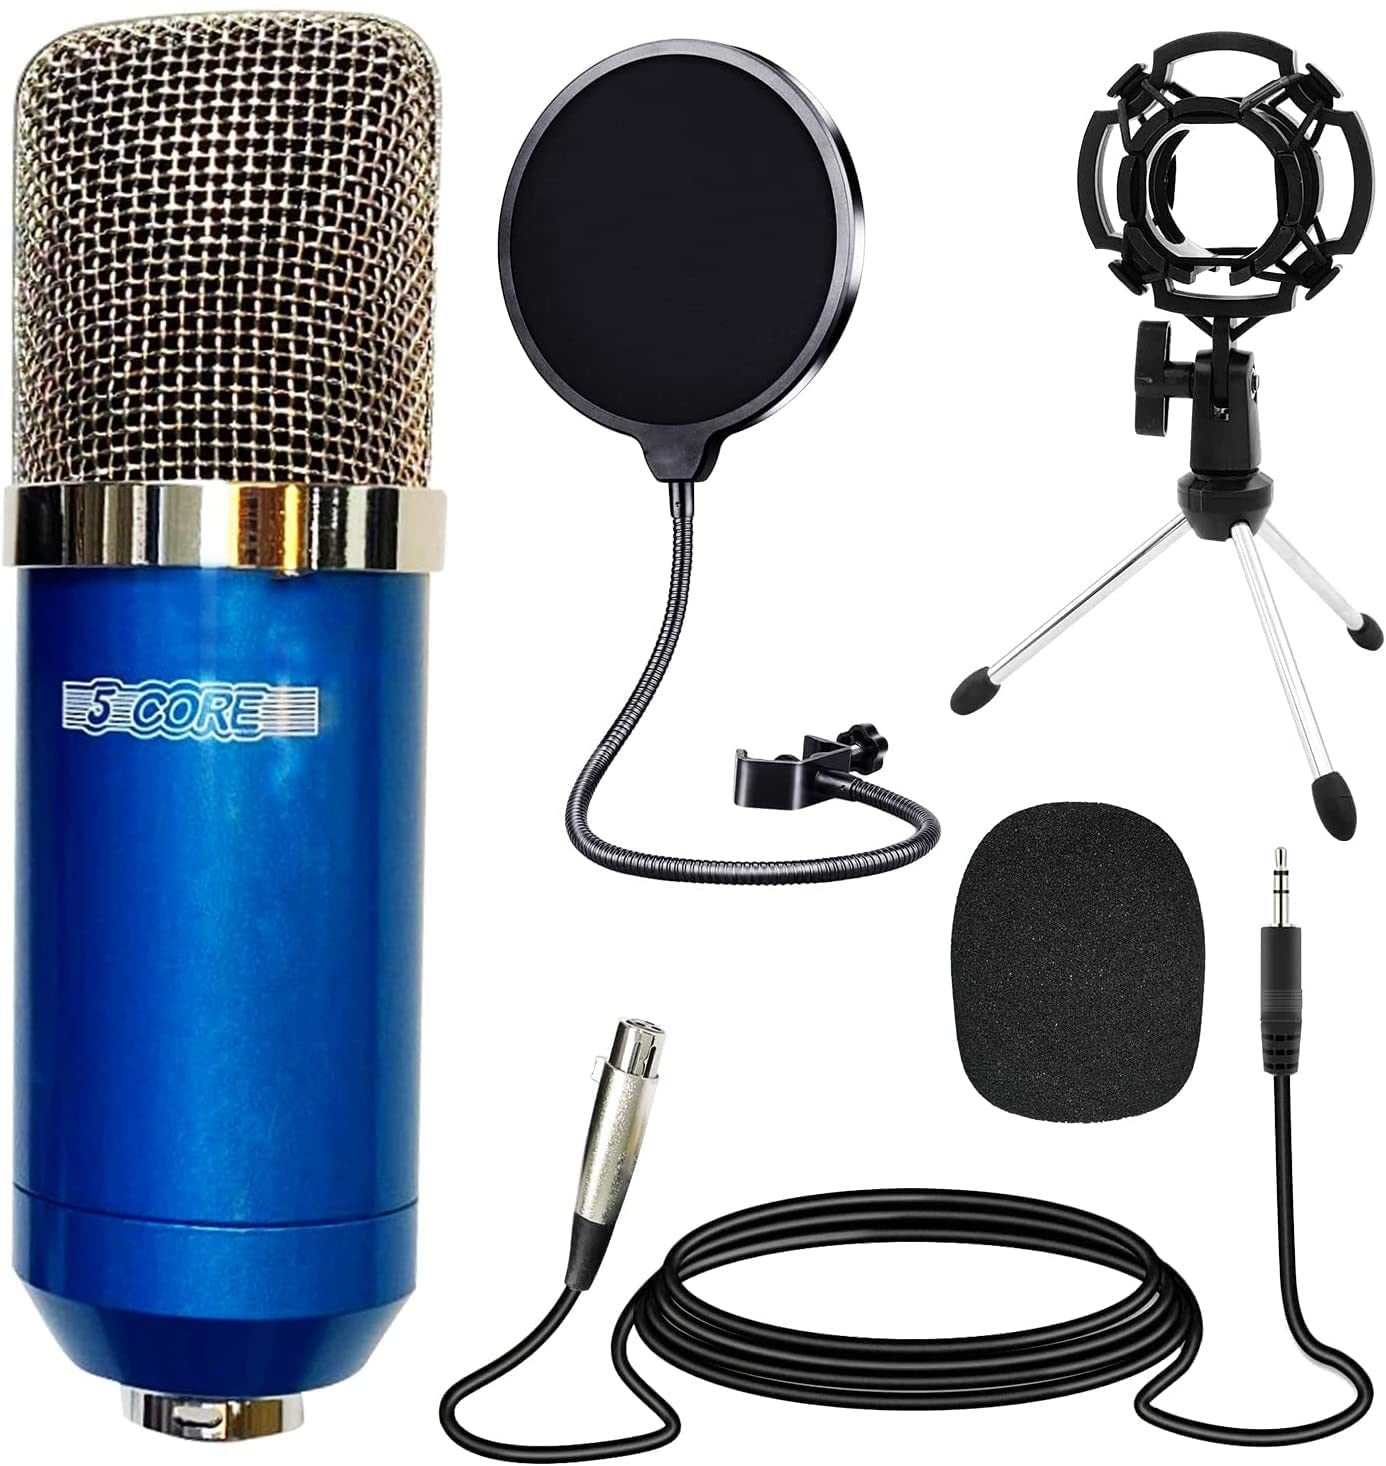 XLR Microphone Condenser Mic for Computer PC Gaming; Podcast Desktop Tripod Stand Kit for Streaming; Recording; Vocals; Voice; Cardioids Studio Microphone 5 Core RM 7 BLU